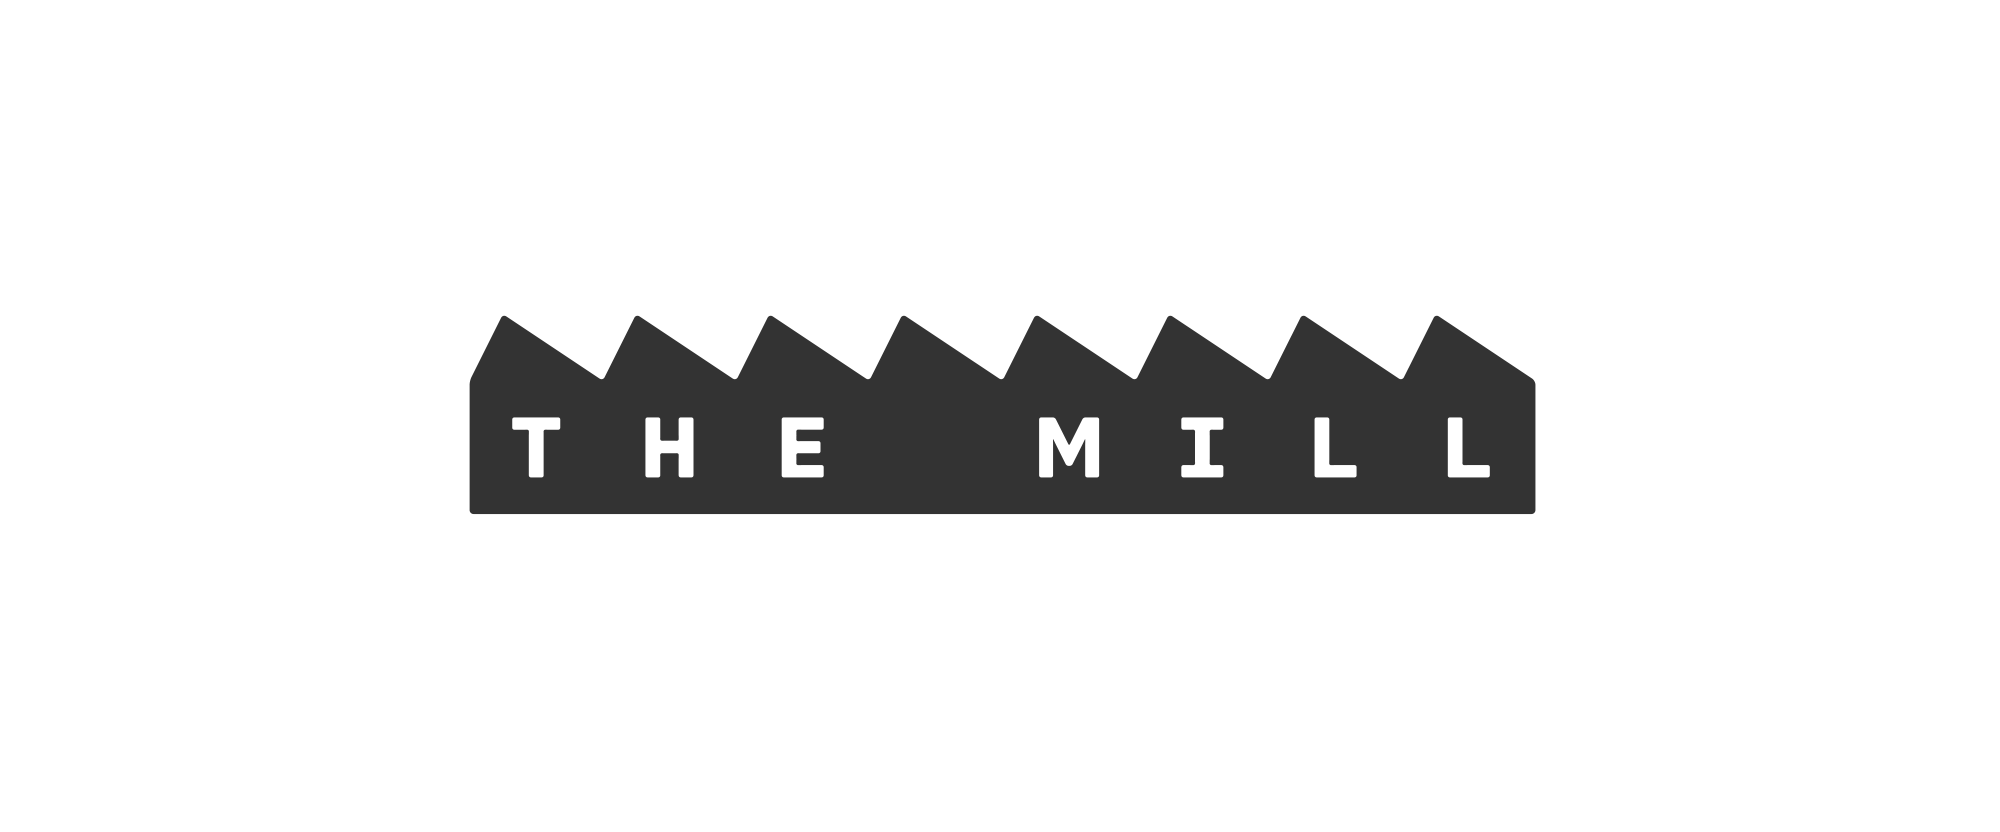 Mill Logo - Brand New: New Logo and Identity for The Mill